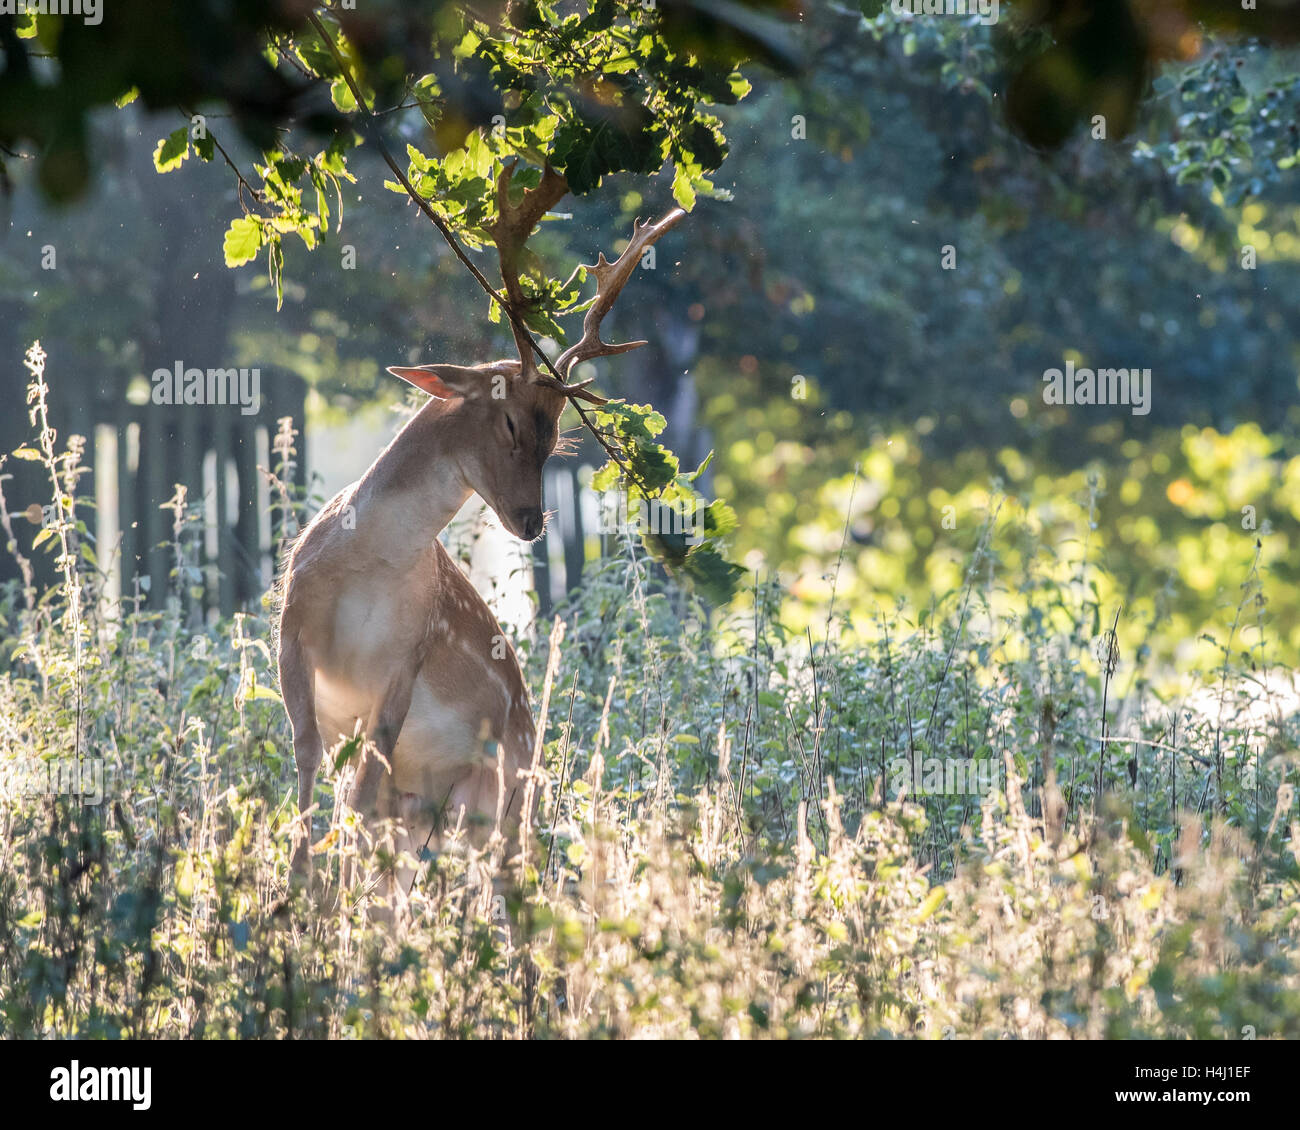 A male deer bringing leaves down from a tree with its antlers Stock Photo